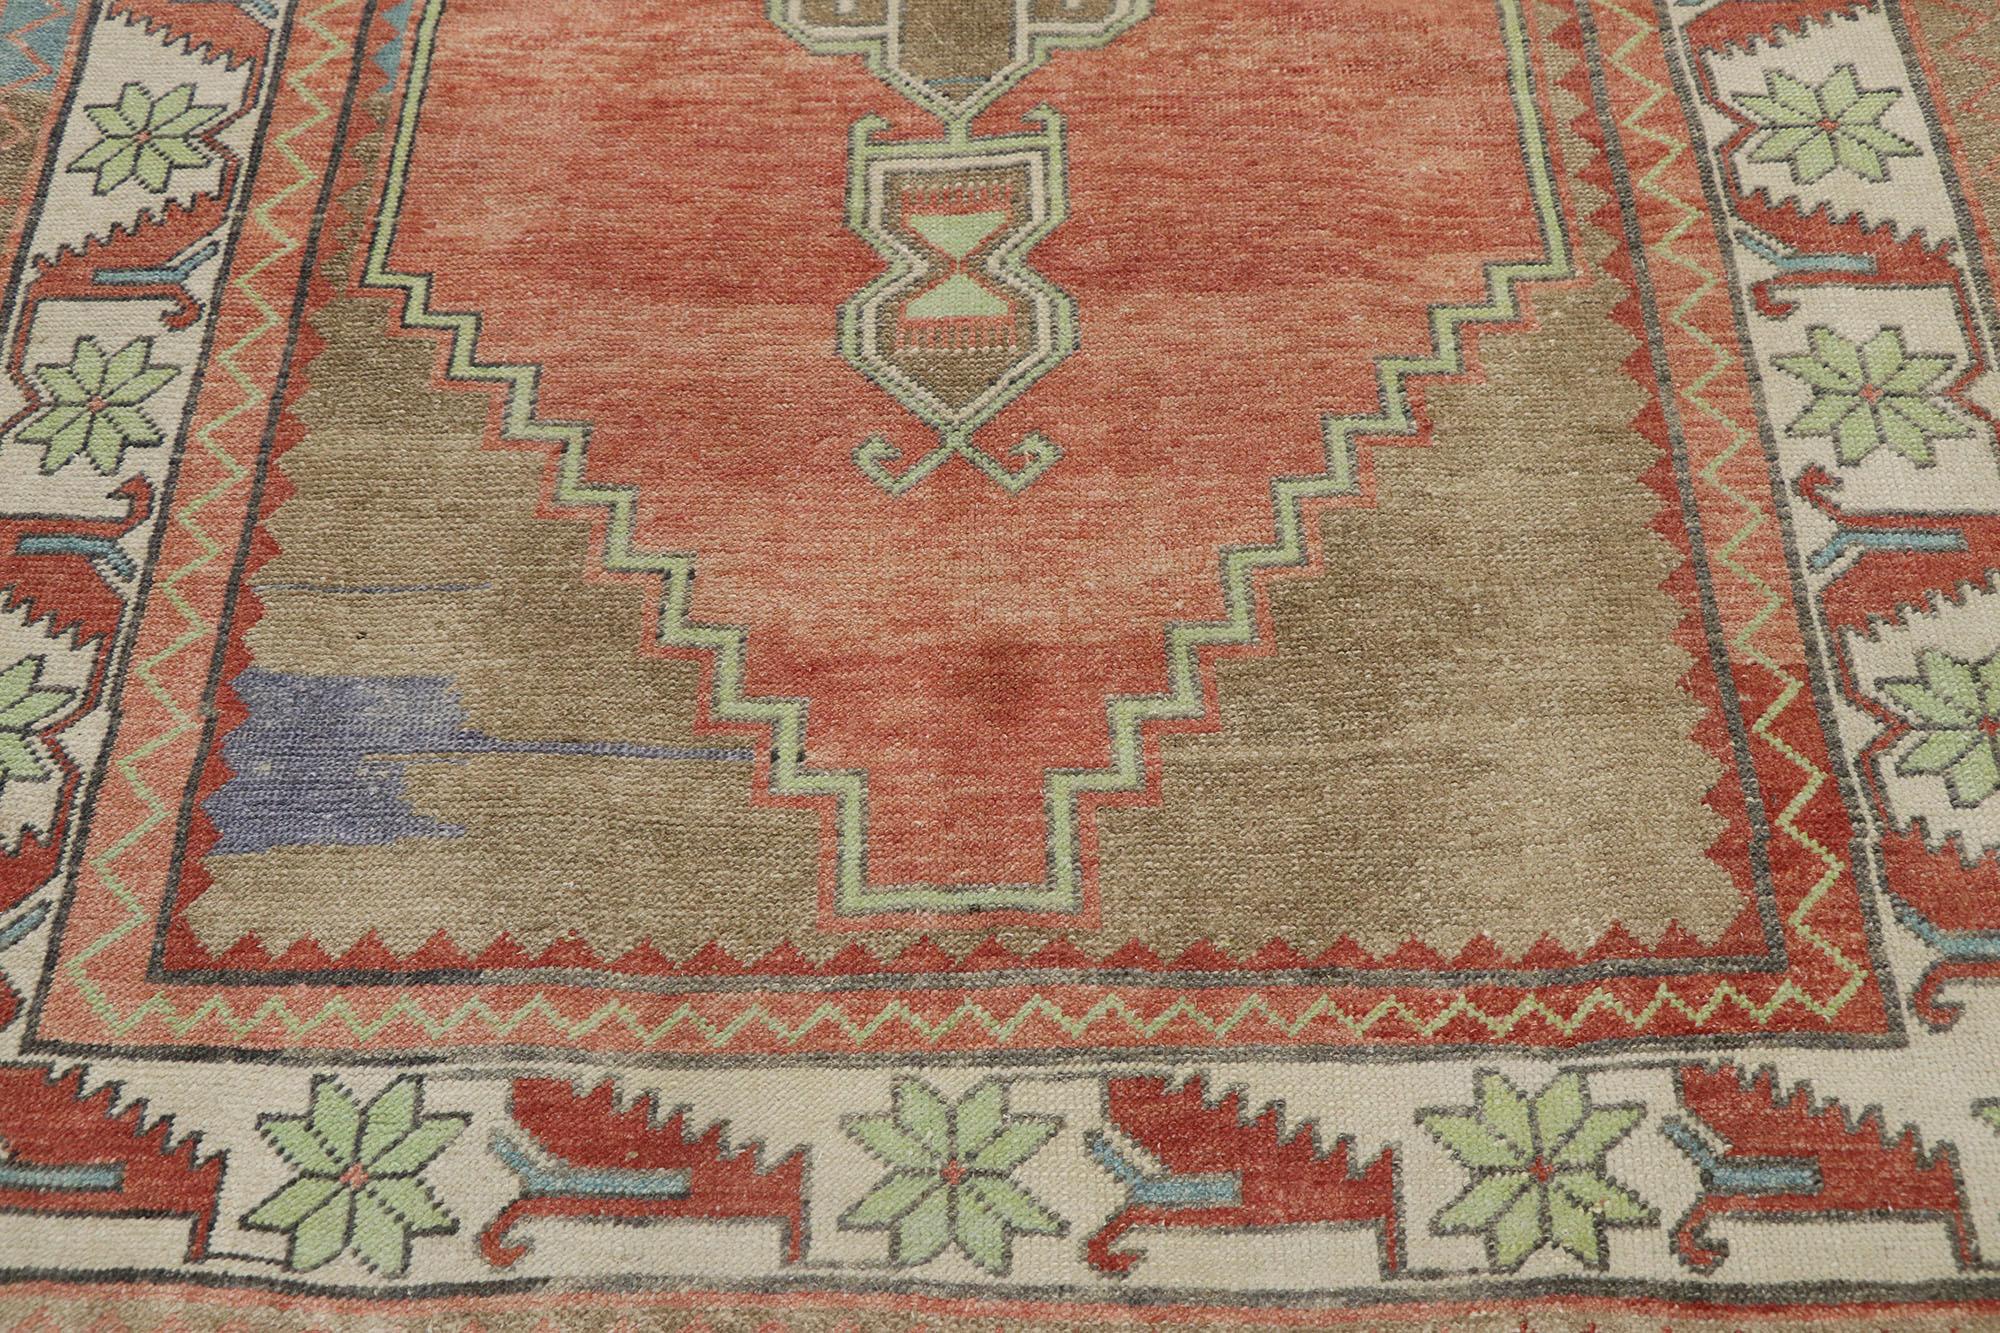 Vintage Turkish Oushak Rug, Rustic Sensibility Meets Nomadic Charm In Good Condition For Sale In Dallas, TX